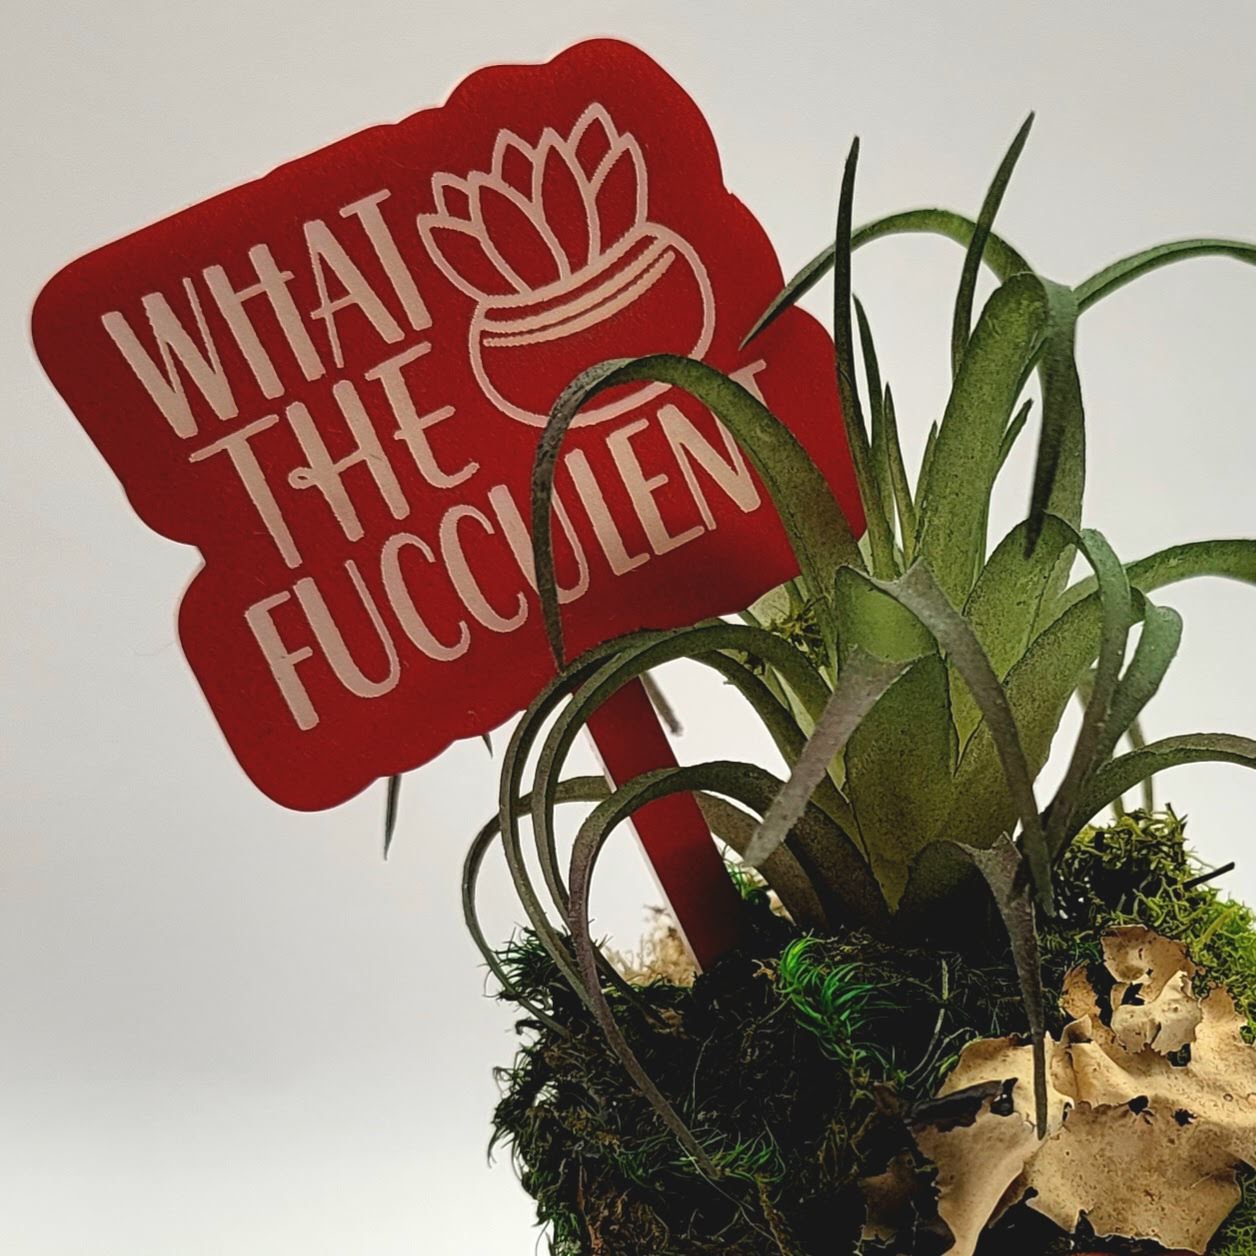 What the Fucculent! Funny Plant Stake